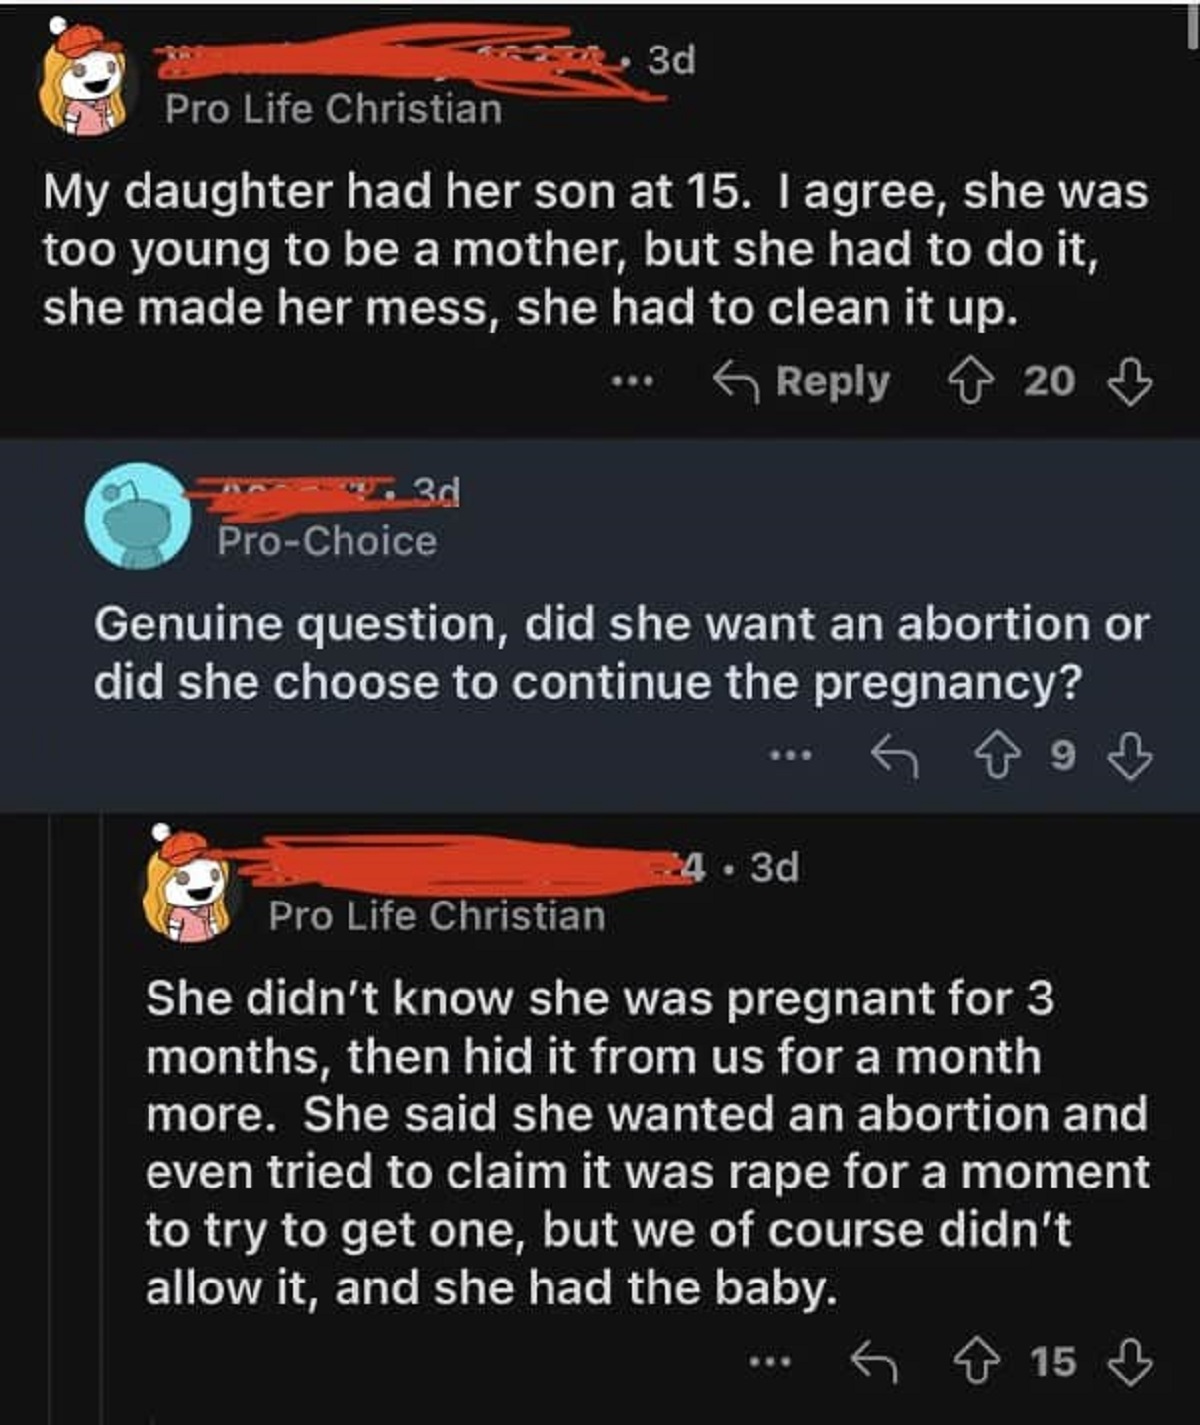 screenshot - Pro Life Christian 3d My daughter had her son at 15. I agree, she was too young to be a mother, but she had to do it, she made her mess, she had to clean it up. 3d ProChoice 20 Genuine question, did she want an abortion or did she choose to c